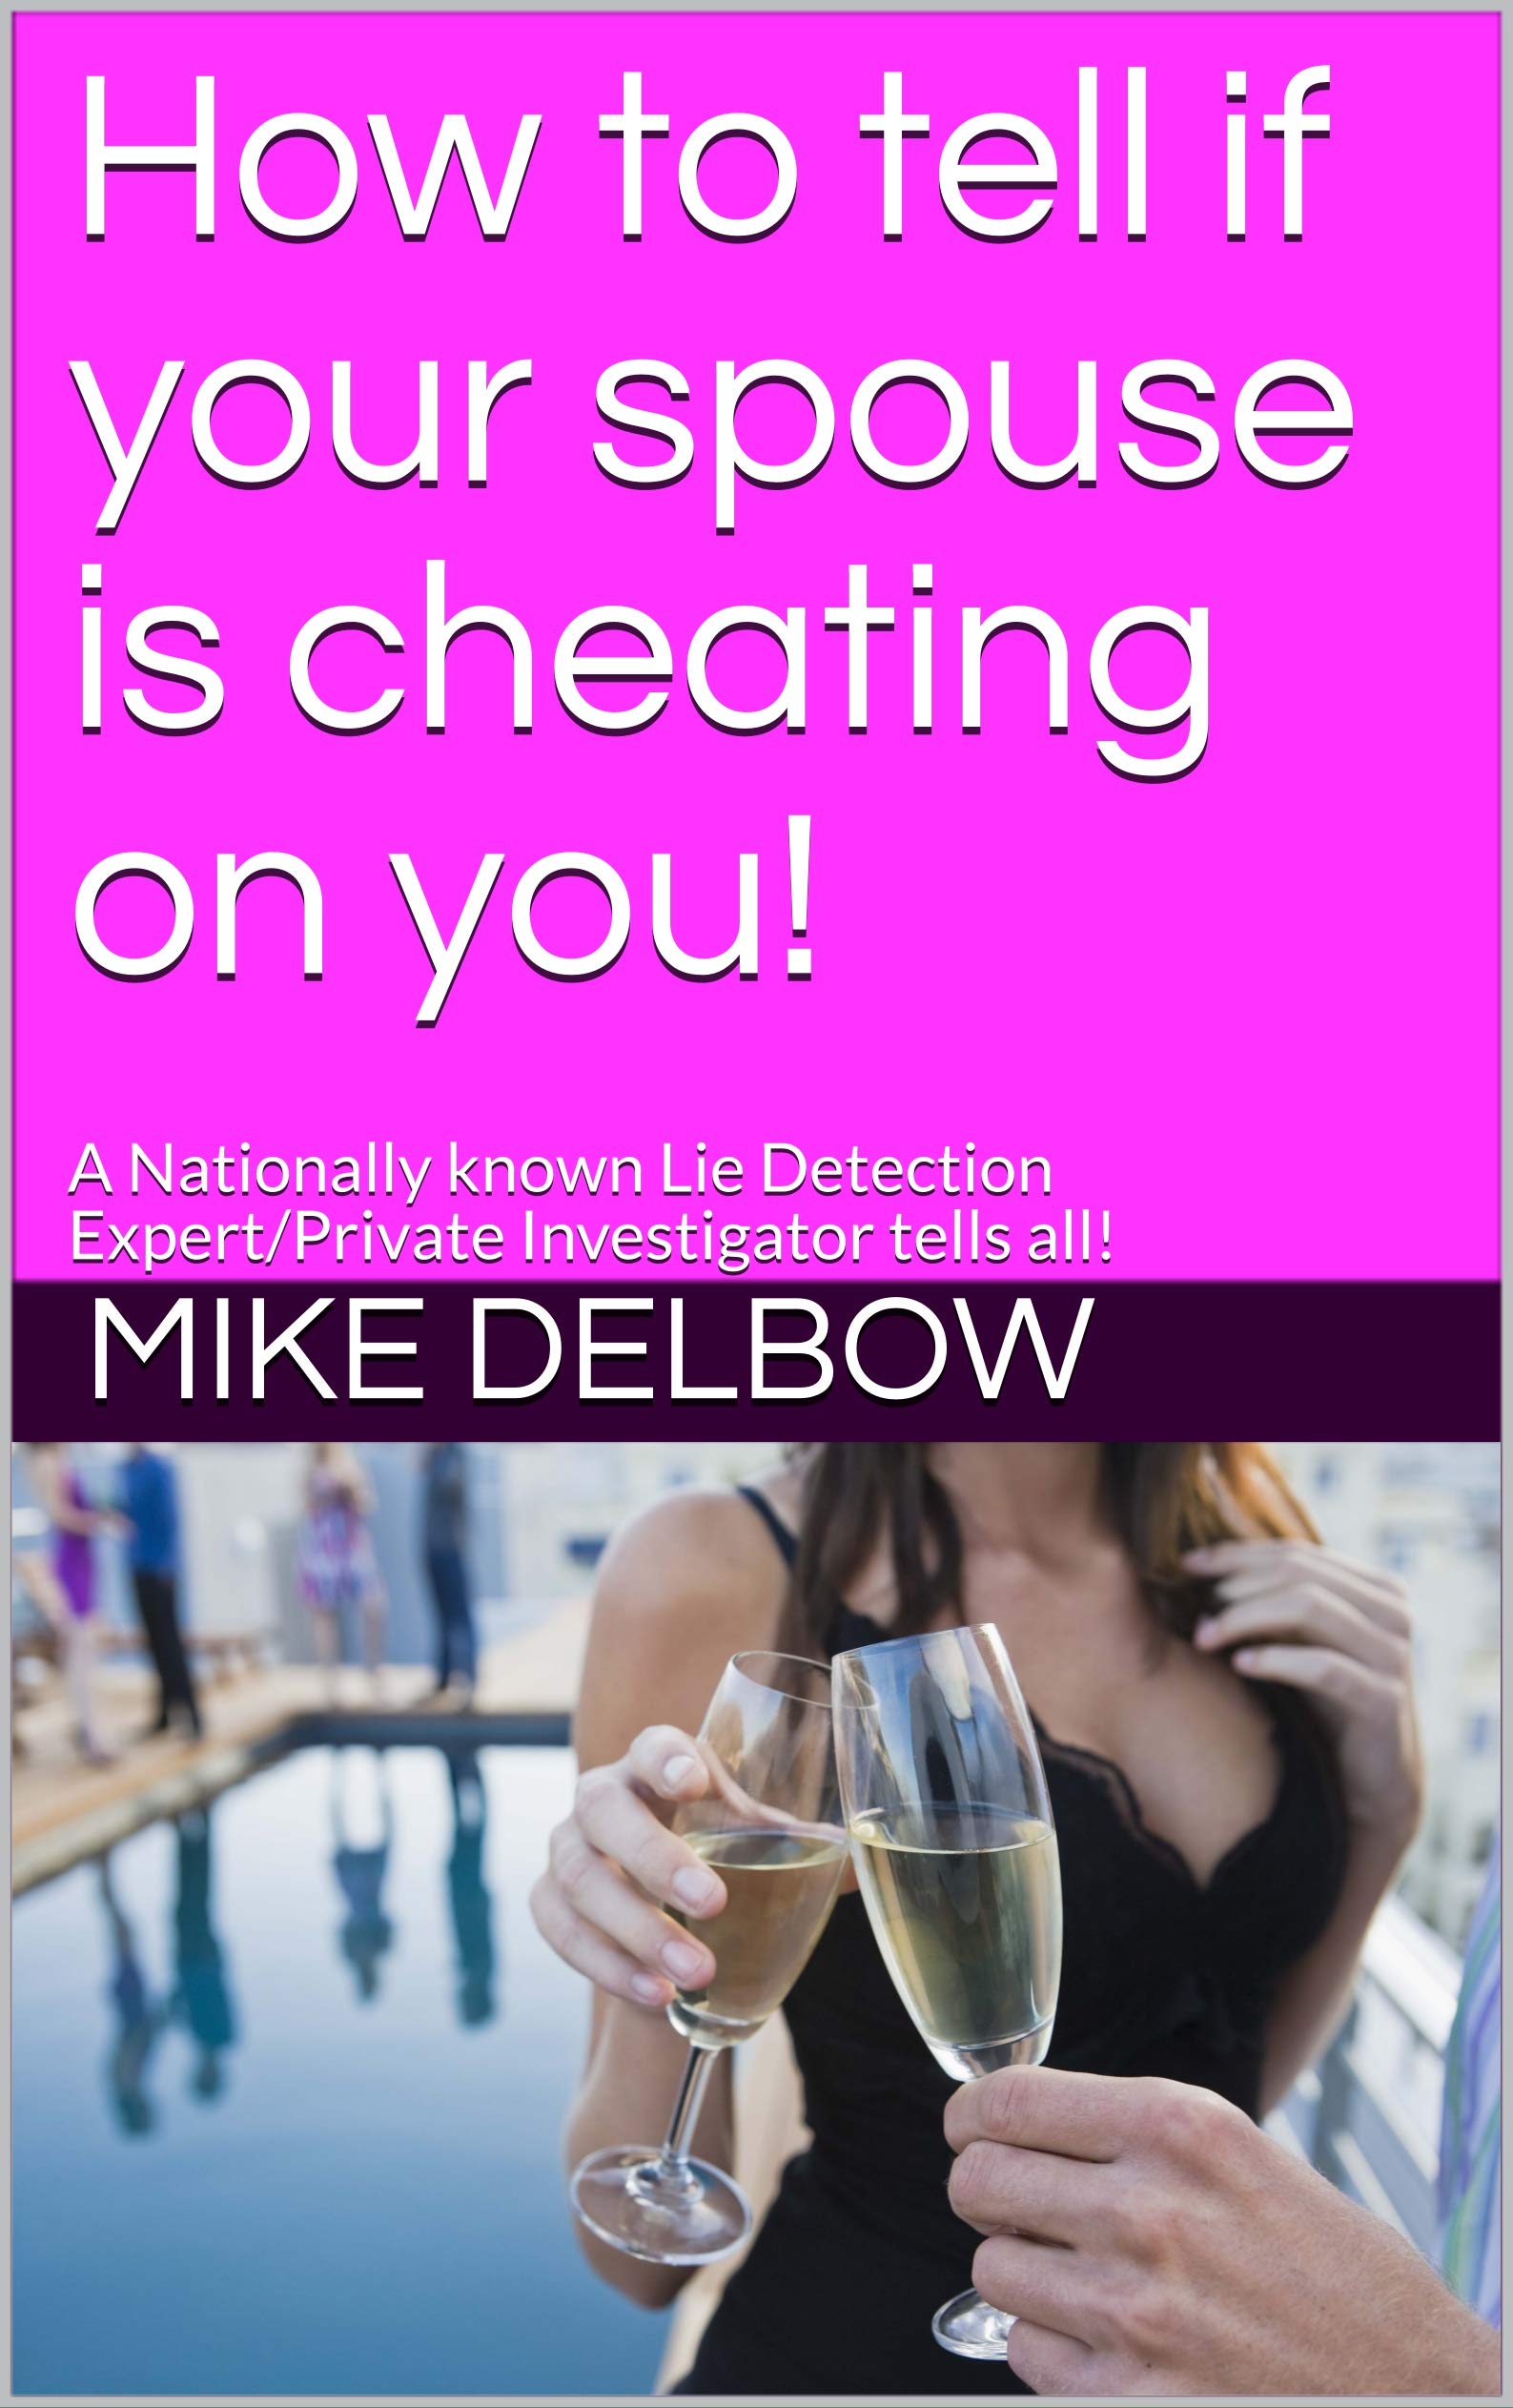 How to tell if your spouse is cheating on you!: A Nationally known Lie Detection Expert/Private Investigator tells all!